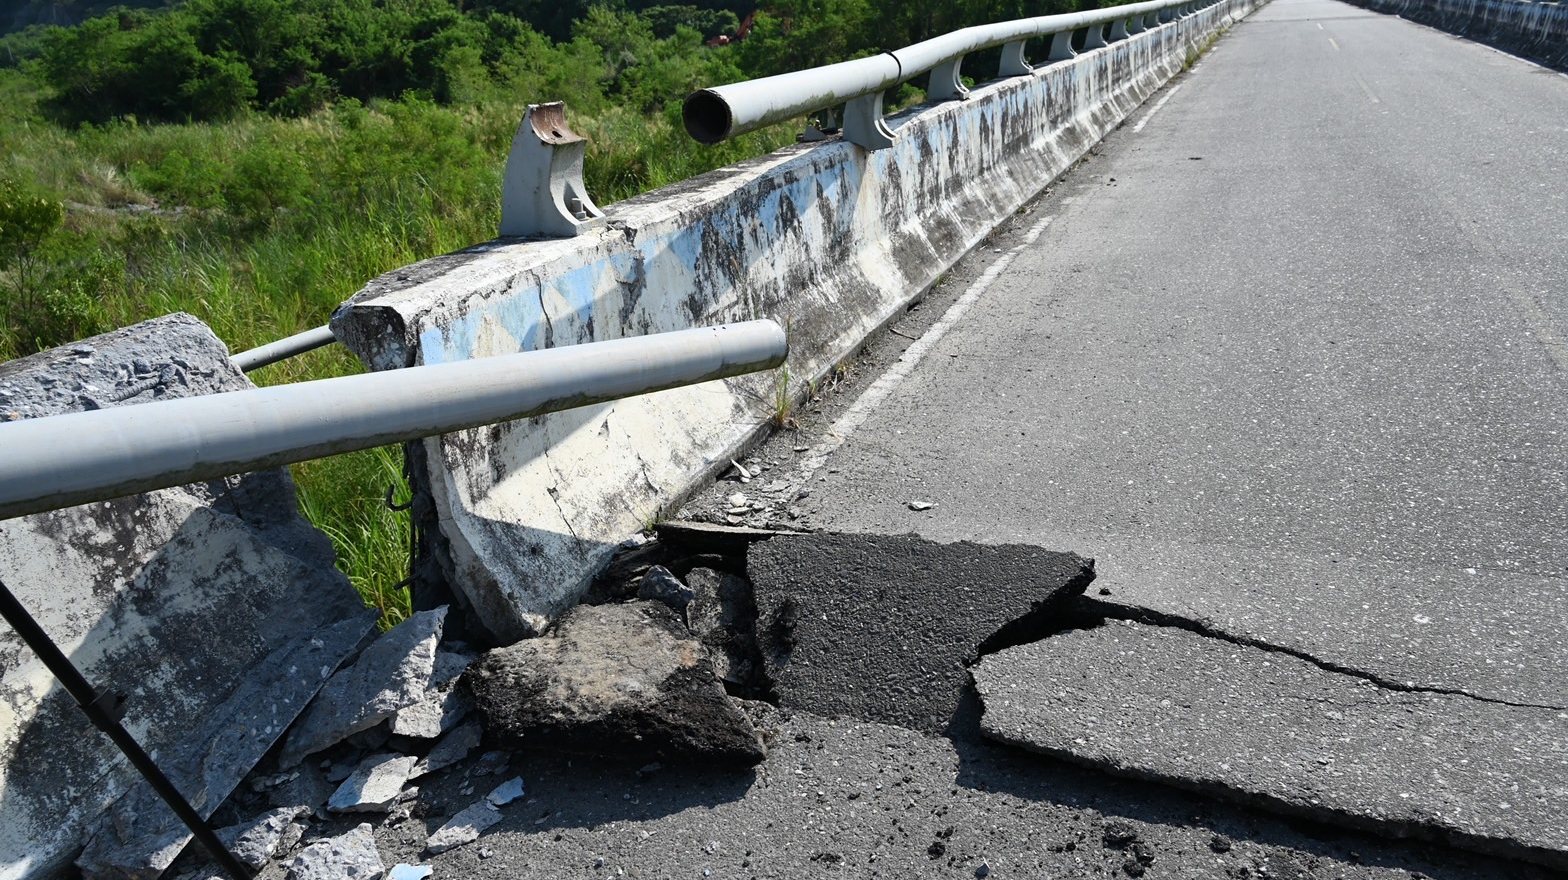 epa10191146 A handout photo released by Hualien county government shows a damaged bridge after a magnitude 6.8 earthquake hit eastern Taiwan, in Hualien county, 18 September 2022. The series of earthquakes and aftershocks caused minor structural damage and derailed a train, but there were no immediate reports of deaths.  EPA/HAULIEN COUNTY GOVERNMENT HANDOUT HANDOUT MANDATORY CREDIT HANDOUT EDITORIAL USE ONLY/NO SALES